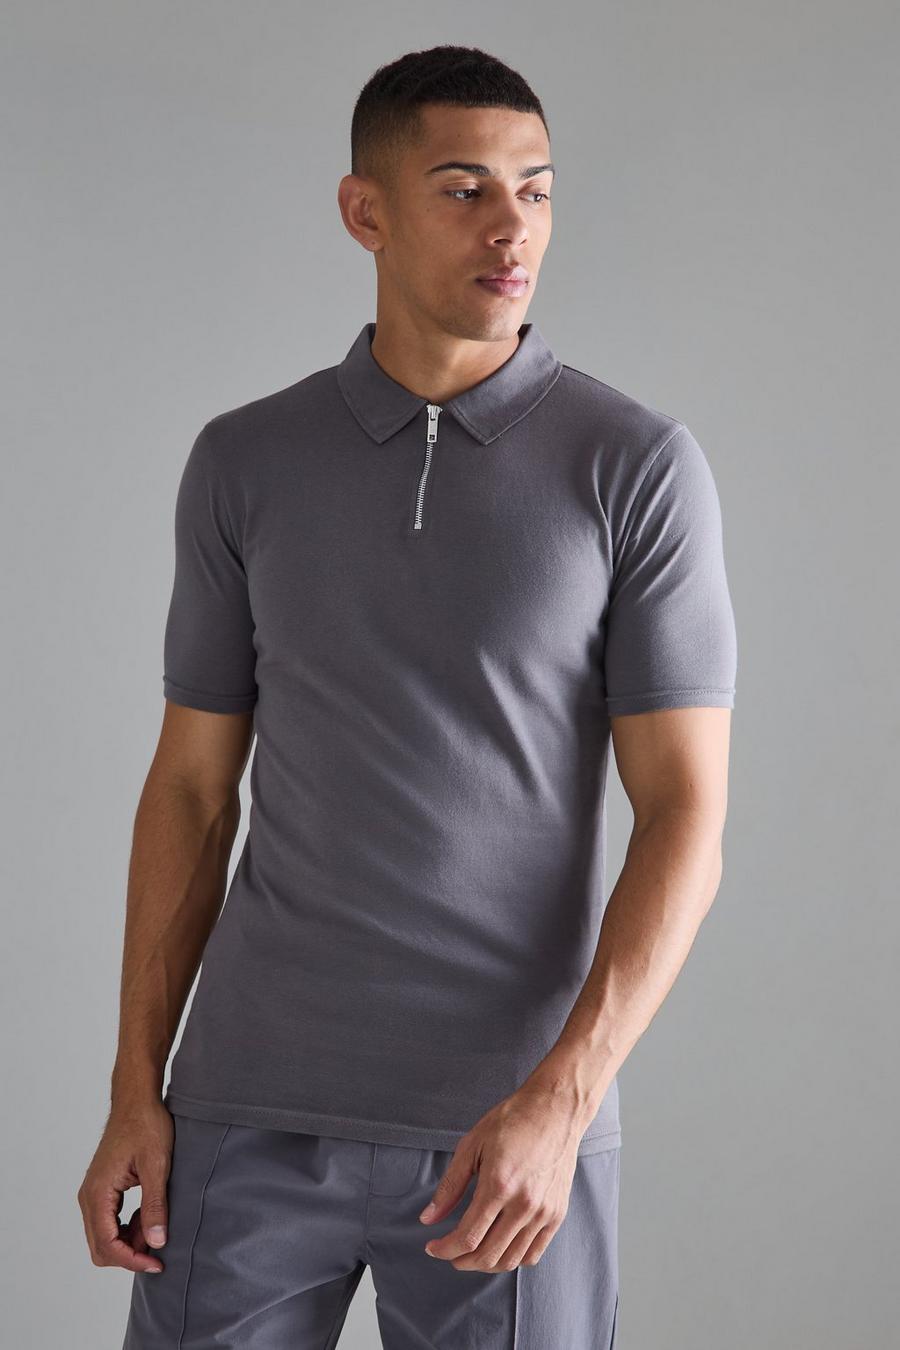 Charcoal Muscle Fit Polo Met Hals Rits